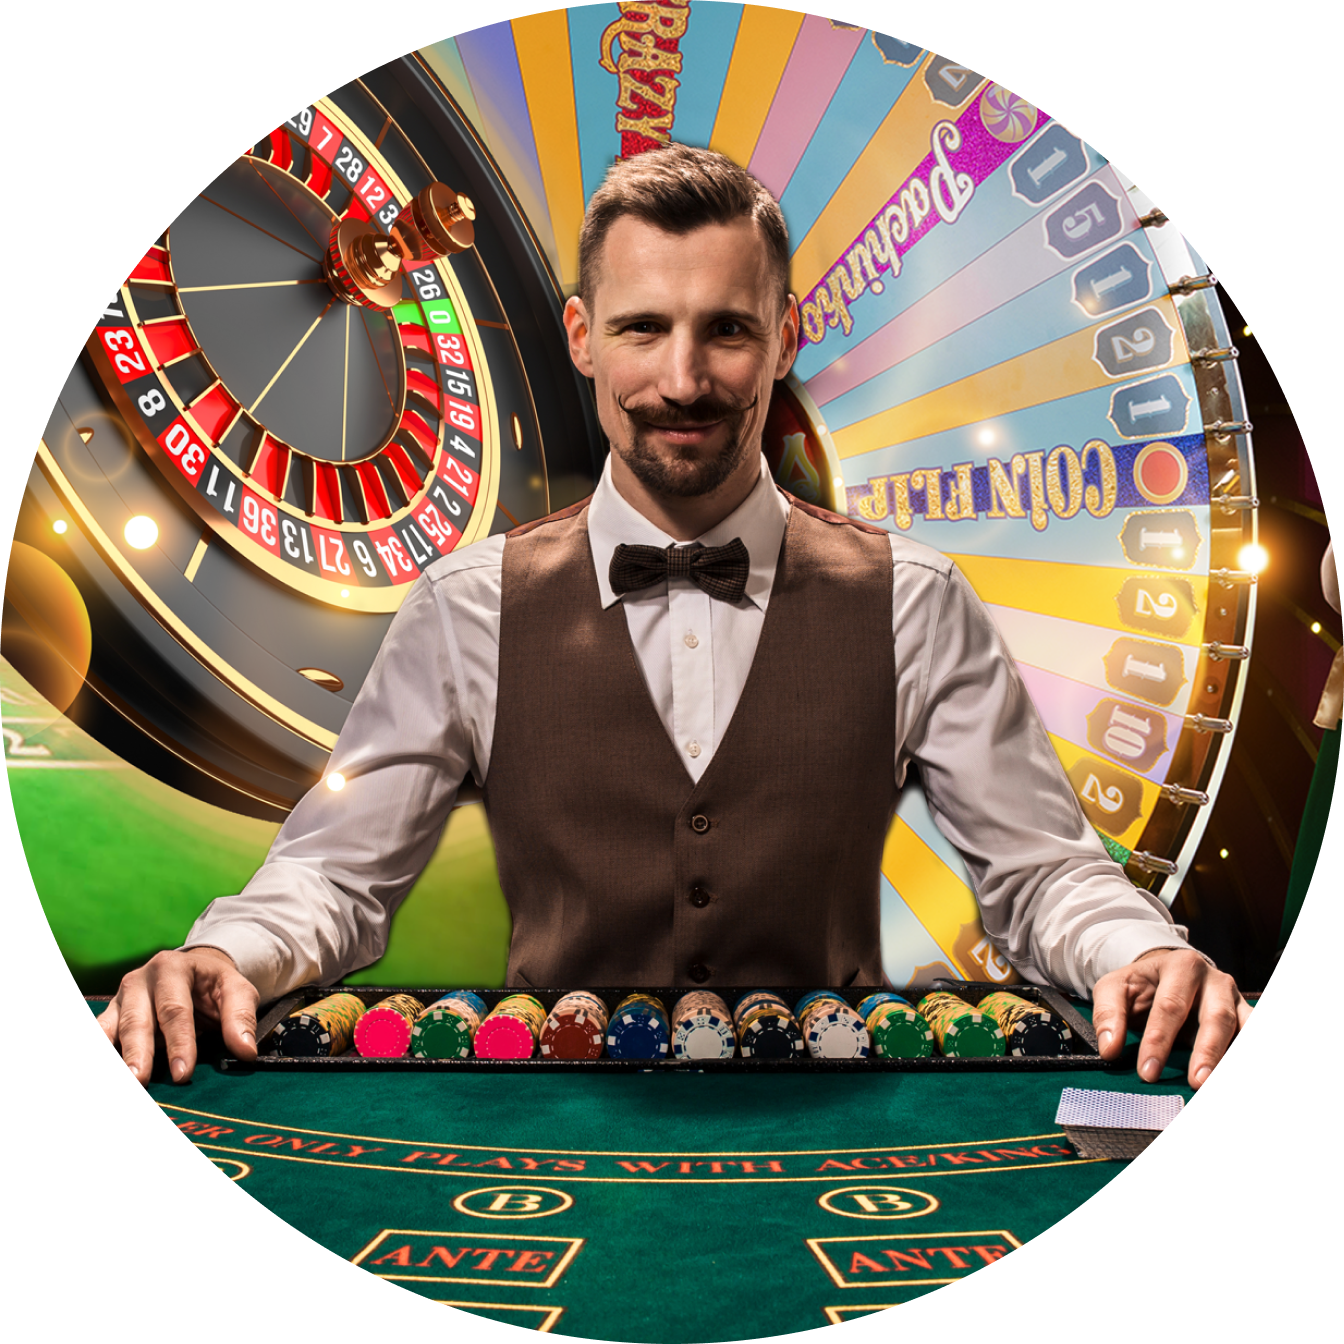 Need More Inspiration With casino online? Read this!